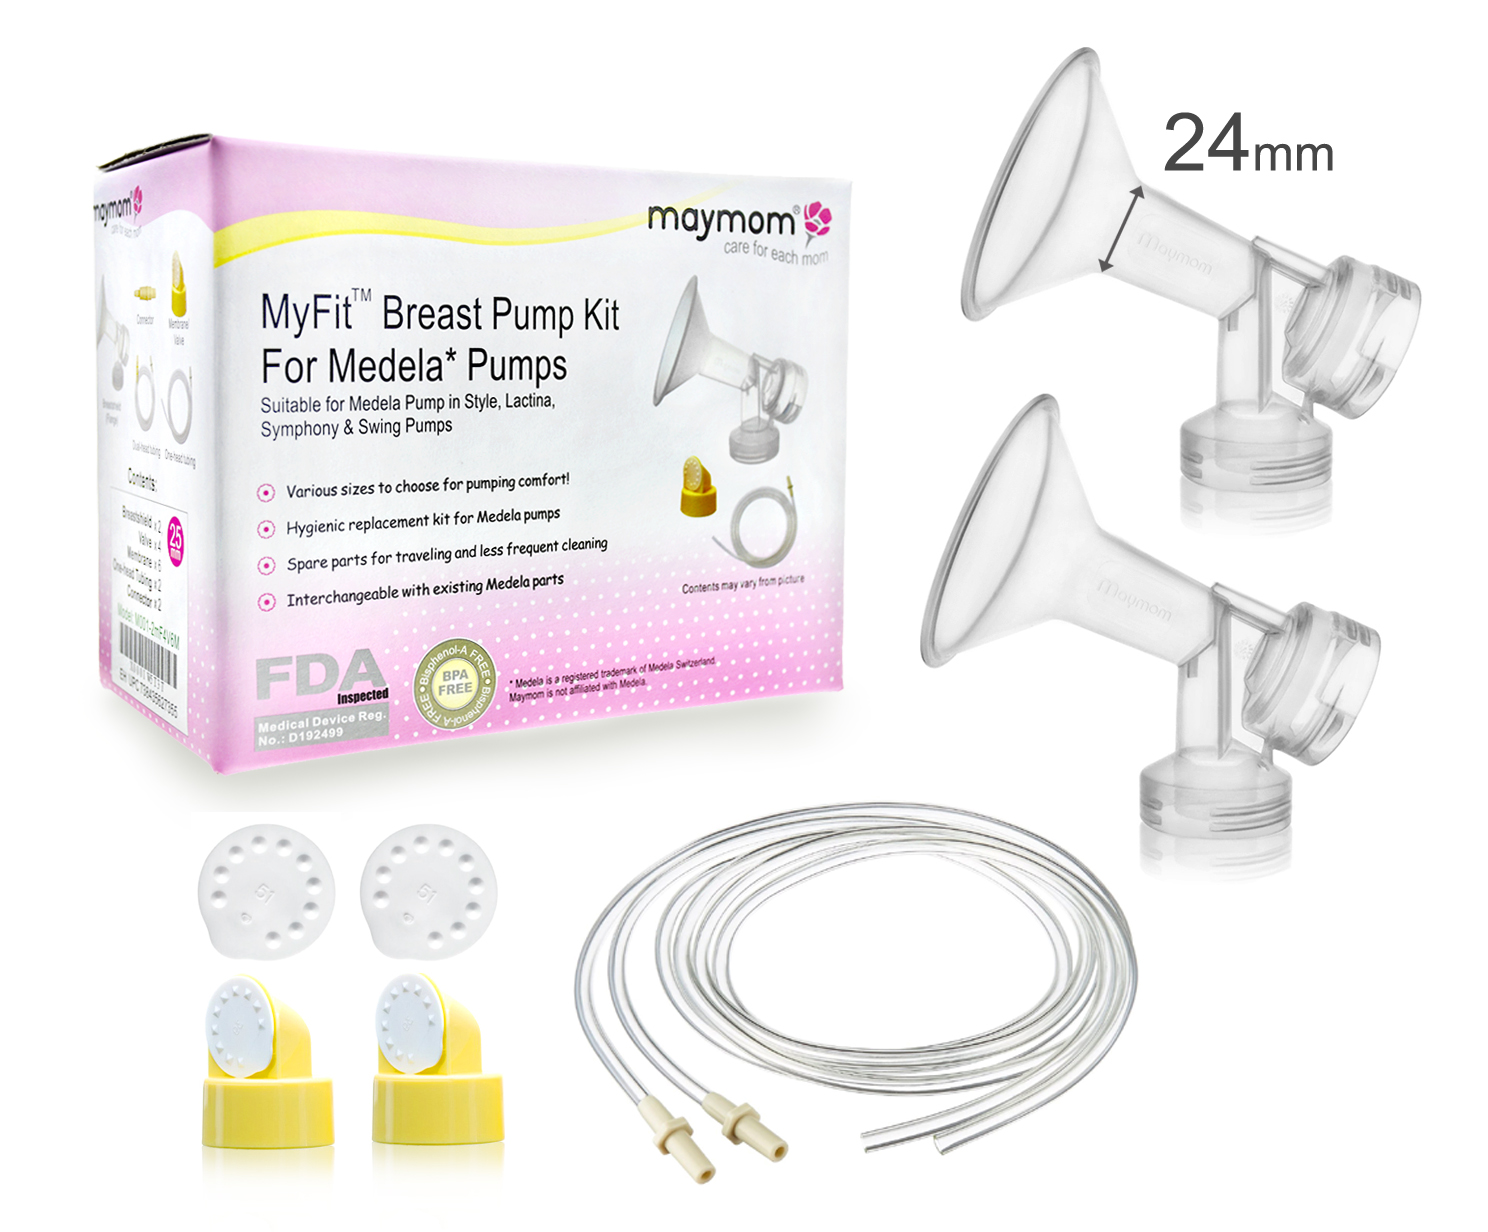 6 Membranes One Piece Design 36mm Maymom Breast Pump Kit Compatible with Medela Pump in Style Pumps; 2X Breastshields & 2 Pumpinsytle Tubing; Extra Extra Large Shields 4 Valves Pump Parts XXL 